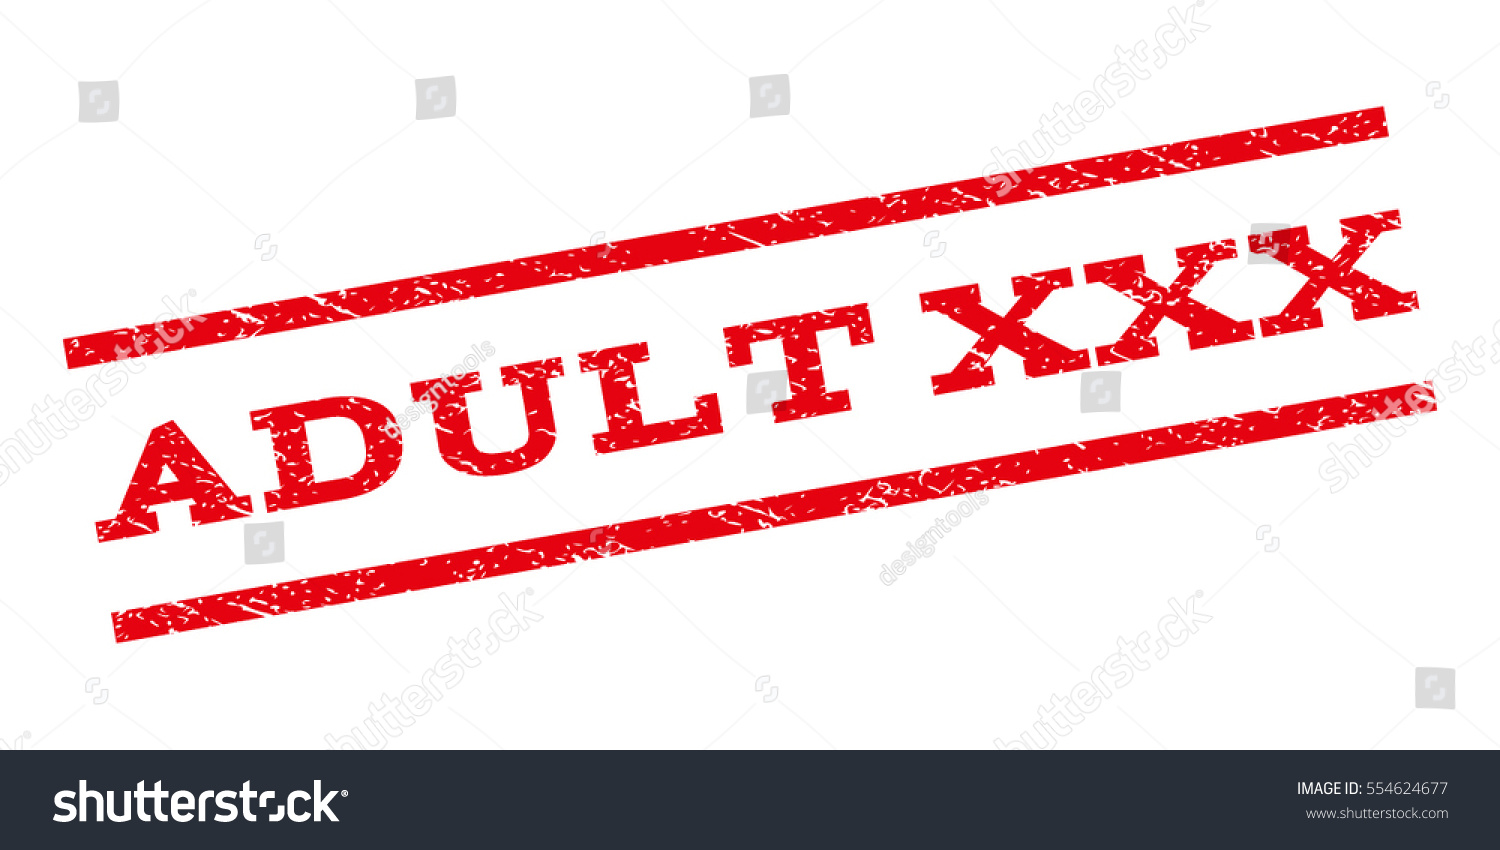 Adult Xxx Watermark Stamp Text Caption Stock Vector Royalty Free 554624677 5308